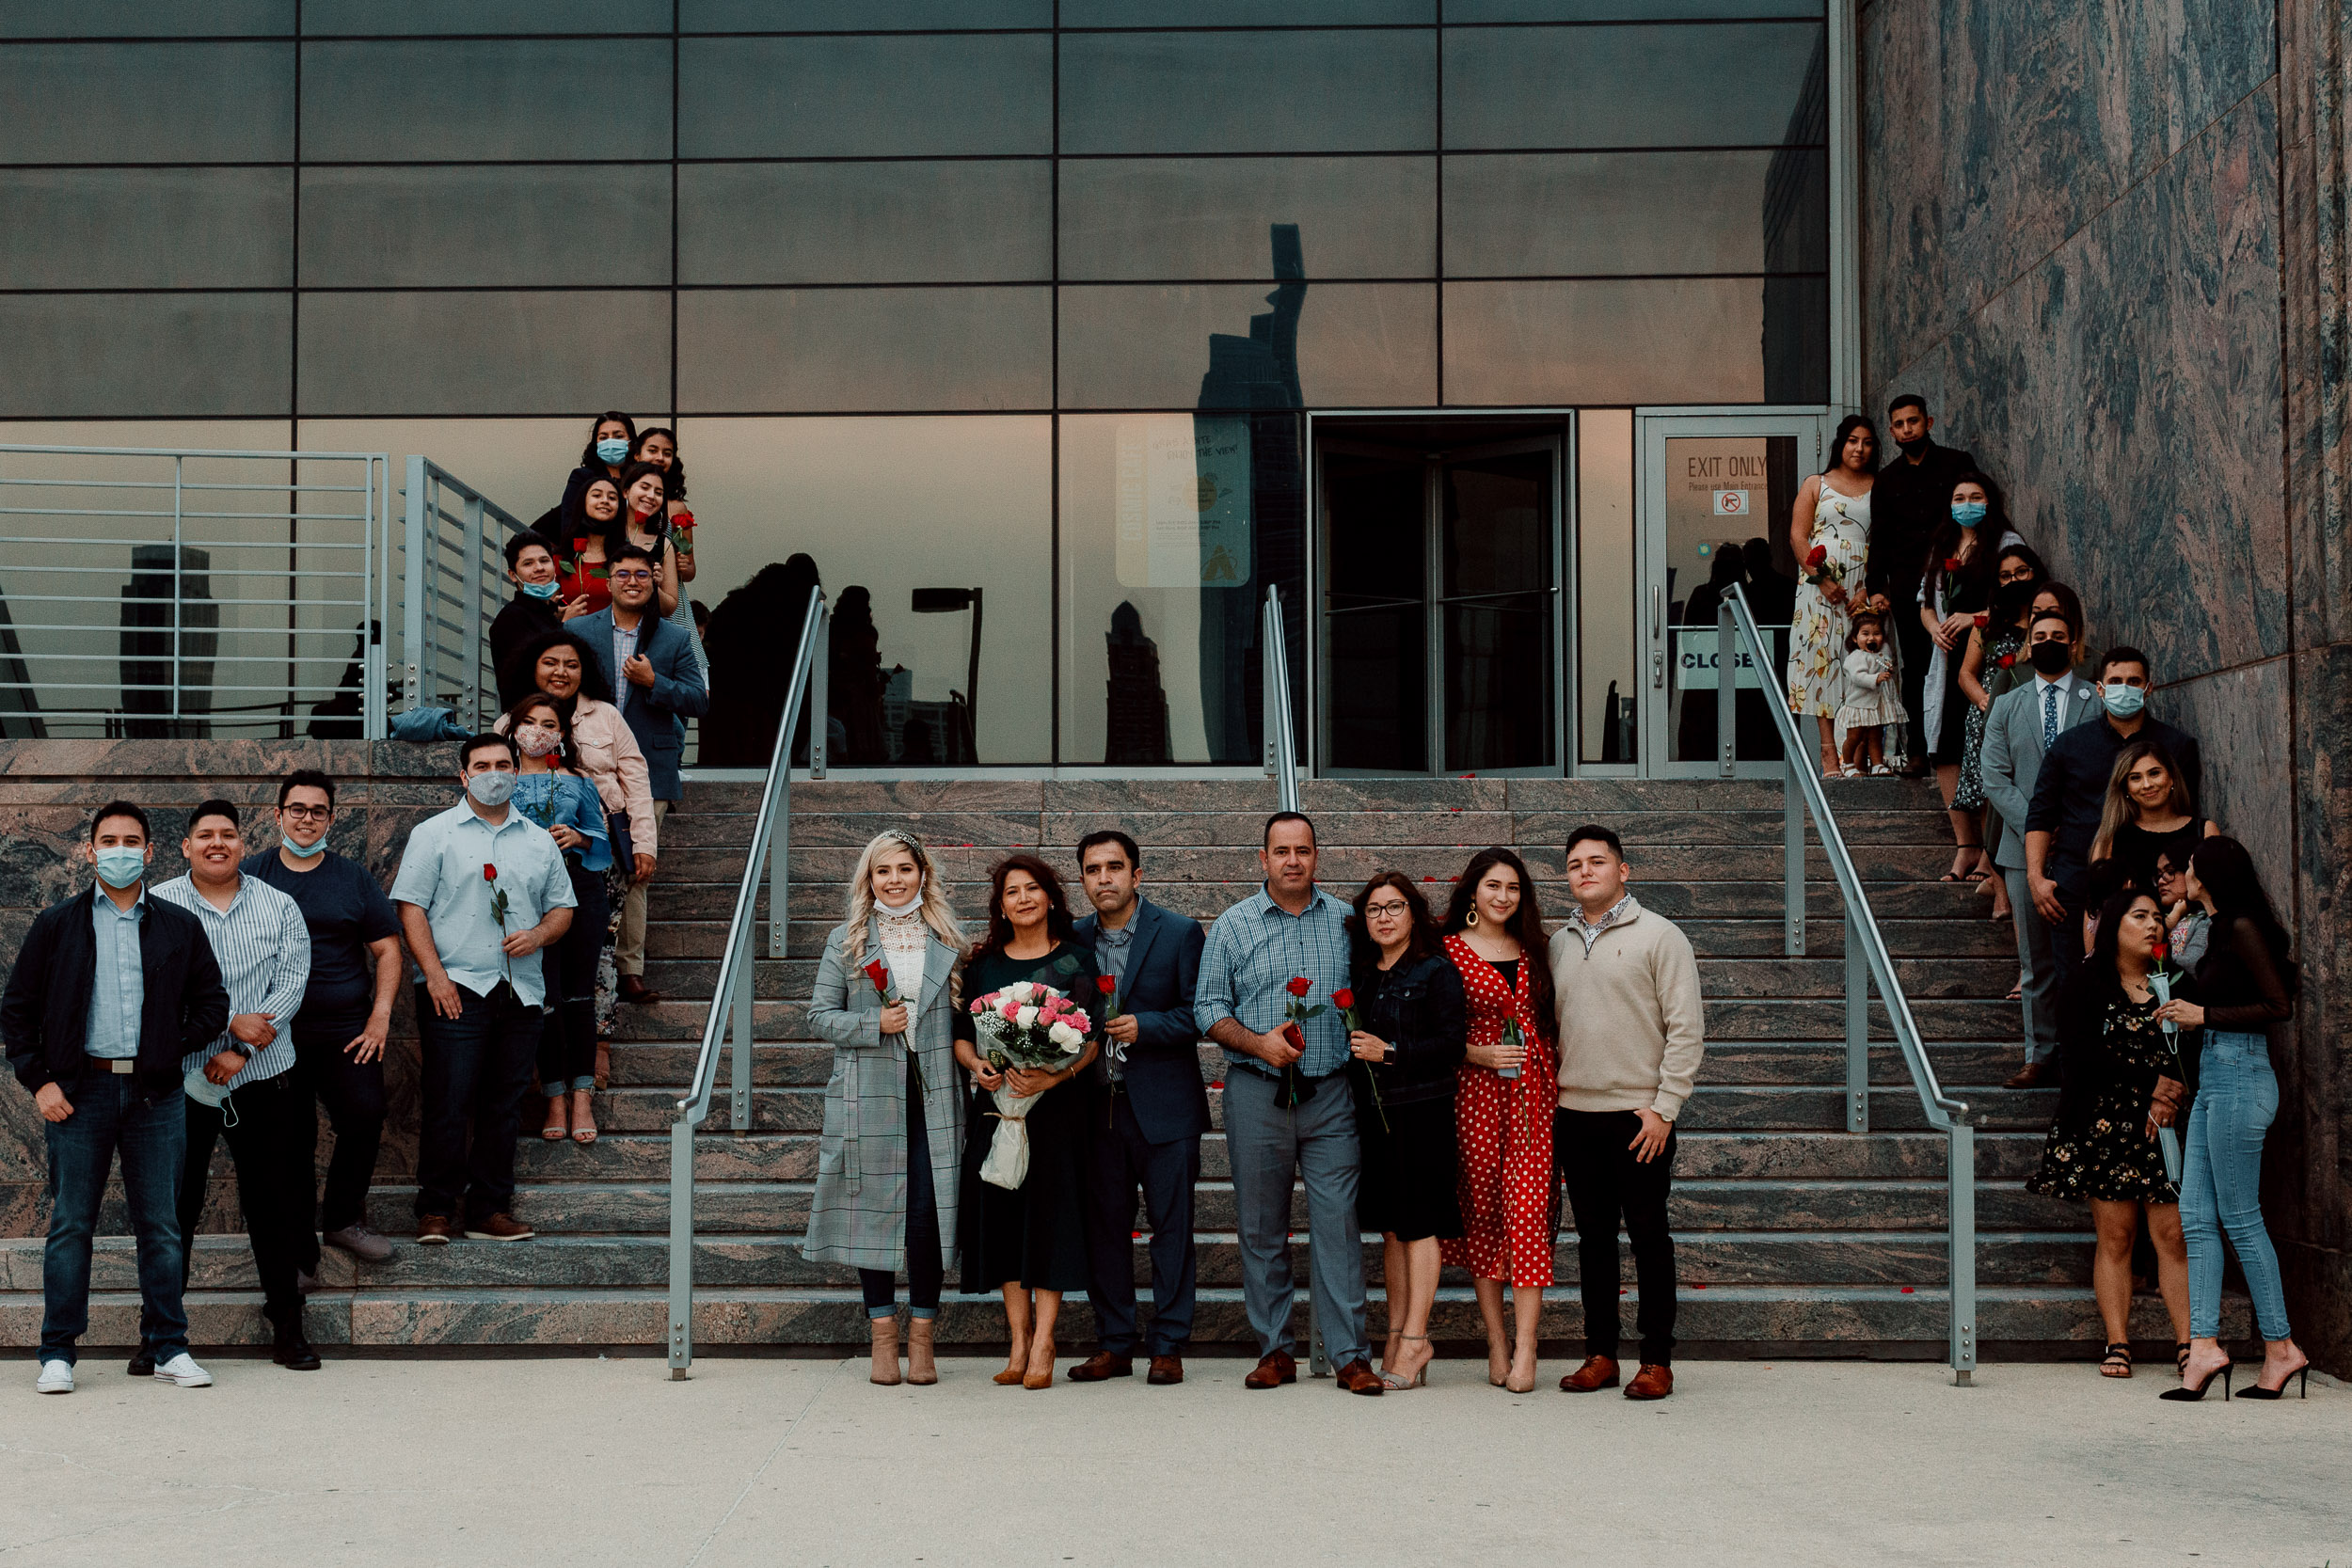 Friends and family at a surprise proposal | Chicago Skyline Proposal | Proposal Ideas | Chicago Engagement Photographer | Chicago Proposal Photographer | Chicago Proposal | Proposal Stories | How to Propose | She Said Yes | Engaged | Places to Get Engaged in Chicago
